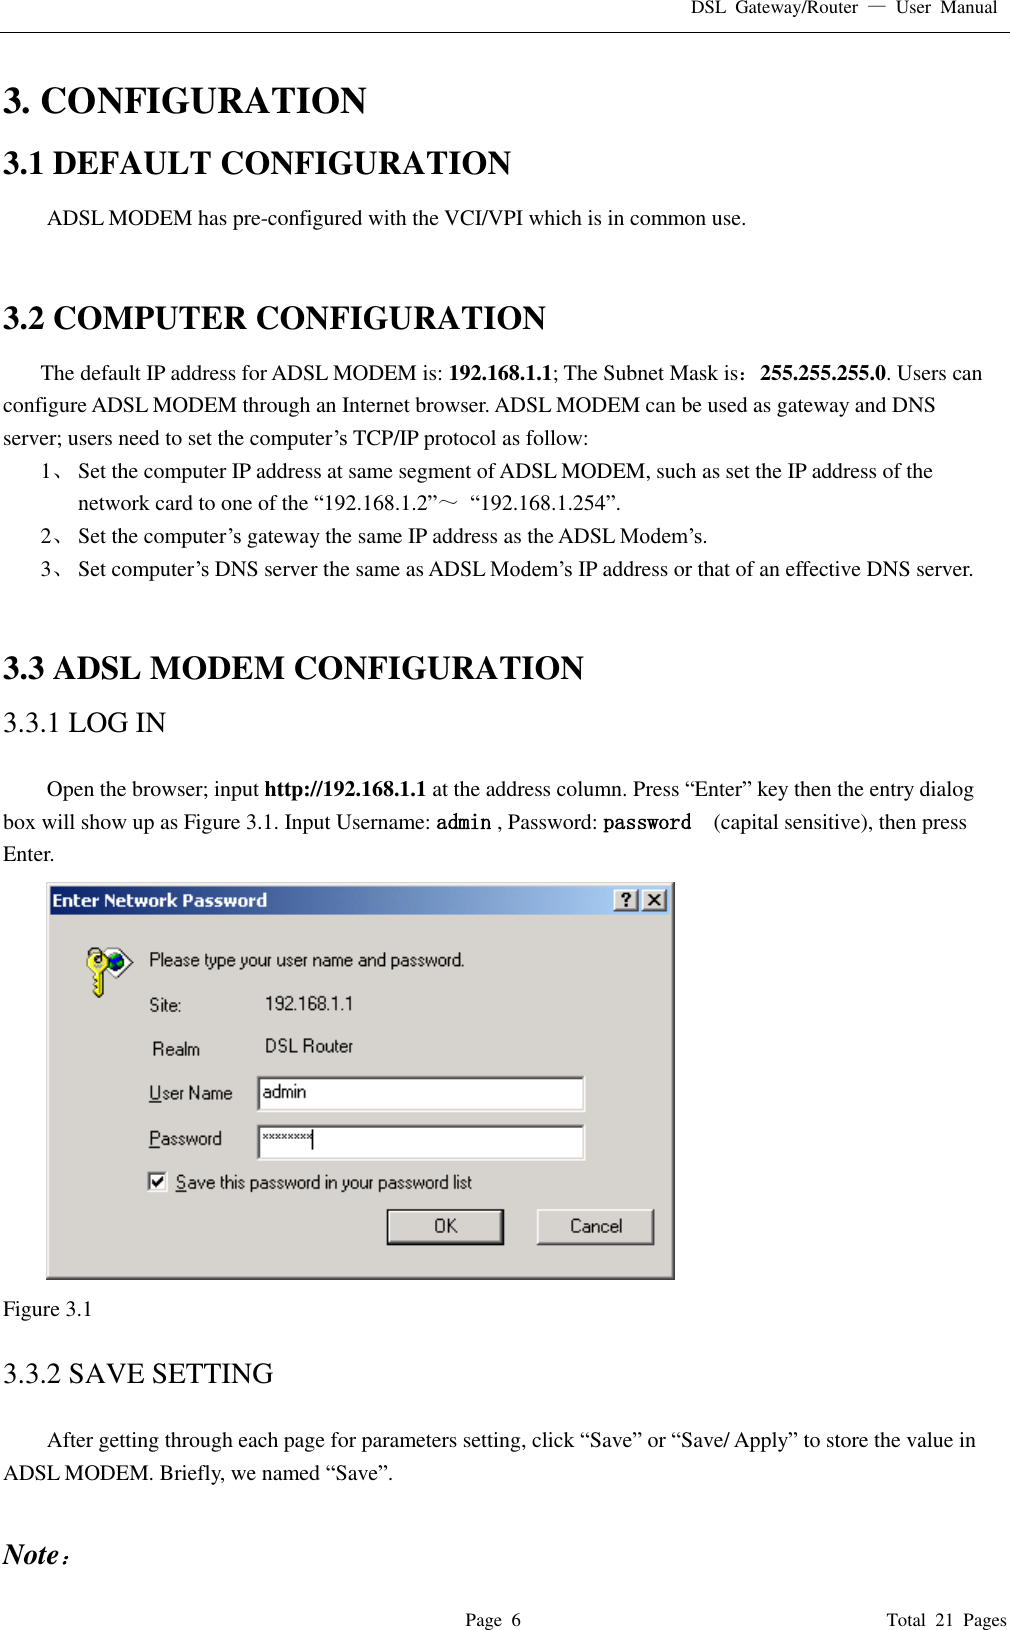 DSL  Gateway/Router  —  User  Manual   Page  6                                                                              Total  21  Pages 3. CONFIGURATION 3.1 DEFAULT CONFIGURATION ADSL MODEM has pre-configured with the VCI/VPI which is in common use.     3.2 COMPUTER CONFIGURATION The default IP address for ADSL MODEM is: 192.168.1.1; The Subnet Mask is：255.255.255.0. Users can configure ADSL MODEM through an Internet browser. ADSL MODEM can be used as gateway and DNS server; users need to set the computer’s TCP/IP protocol as follow: 1、 Set the computer IP address at same segment of ADSL MODEM, such as set the IP address of the network card to one of the “192.168.1.2”～ “192.168.1.254”. 2、 Set the computer’s gateway the same IP address as the ADSL Modem’s. 3、 Set computer’s DNS server the same as ADSL Modem’s IP address or that of an effective DNS server.   3.3 ADSL MODEM CONFIGURATION 3.3.1 LOG IN  Open the browser; input http://192.168.1.1 at the address column. Press “Enter” key then the entry dialog box will show up as Figure 3.1. Input Username: admin , Password: password   (capital sensitive), then press Enter.  Figure 3.1  3.3.2 SAVE SETTING  After getting through each page for parameters setting, click “Save” or “Save/ Apply” to store the value in ADSL MODEM. Briefly, we named “Save”.  Note： 